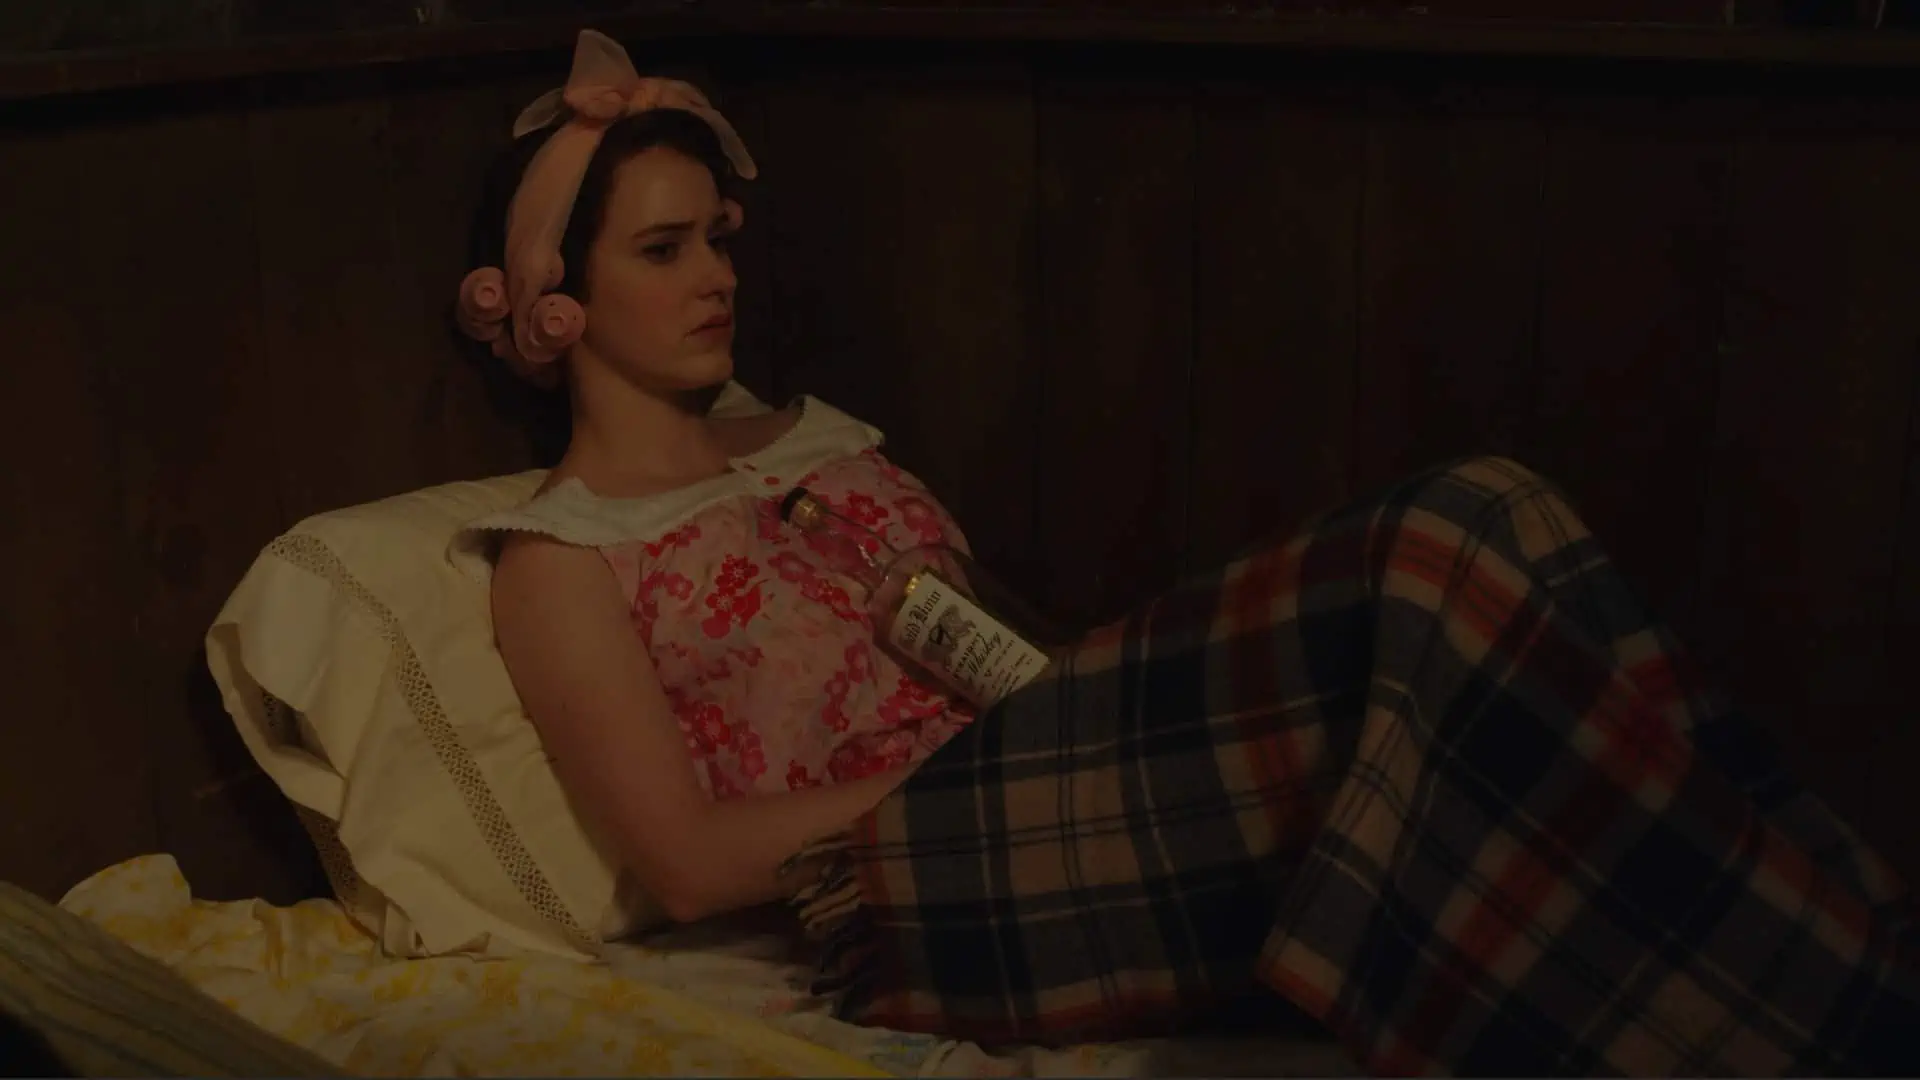 The Marvelous Mrs. Maisel: Season 4/ Episode 1 “Rumble on the Wonder Wheel” – Recap/ Review (with Spoilers)